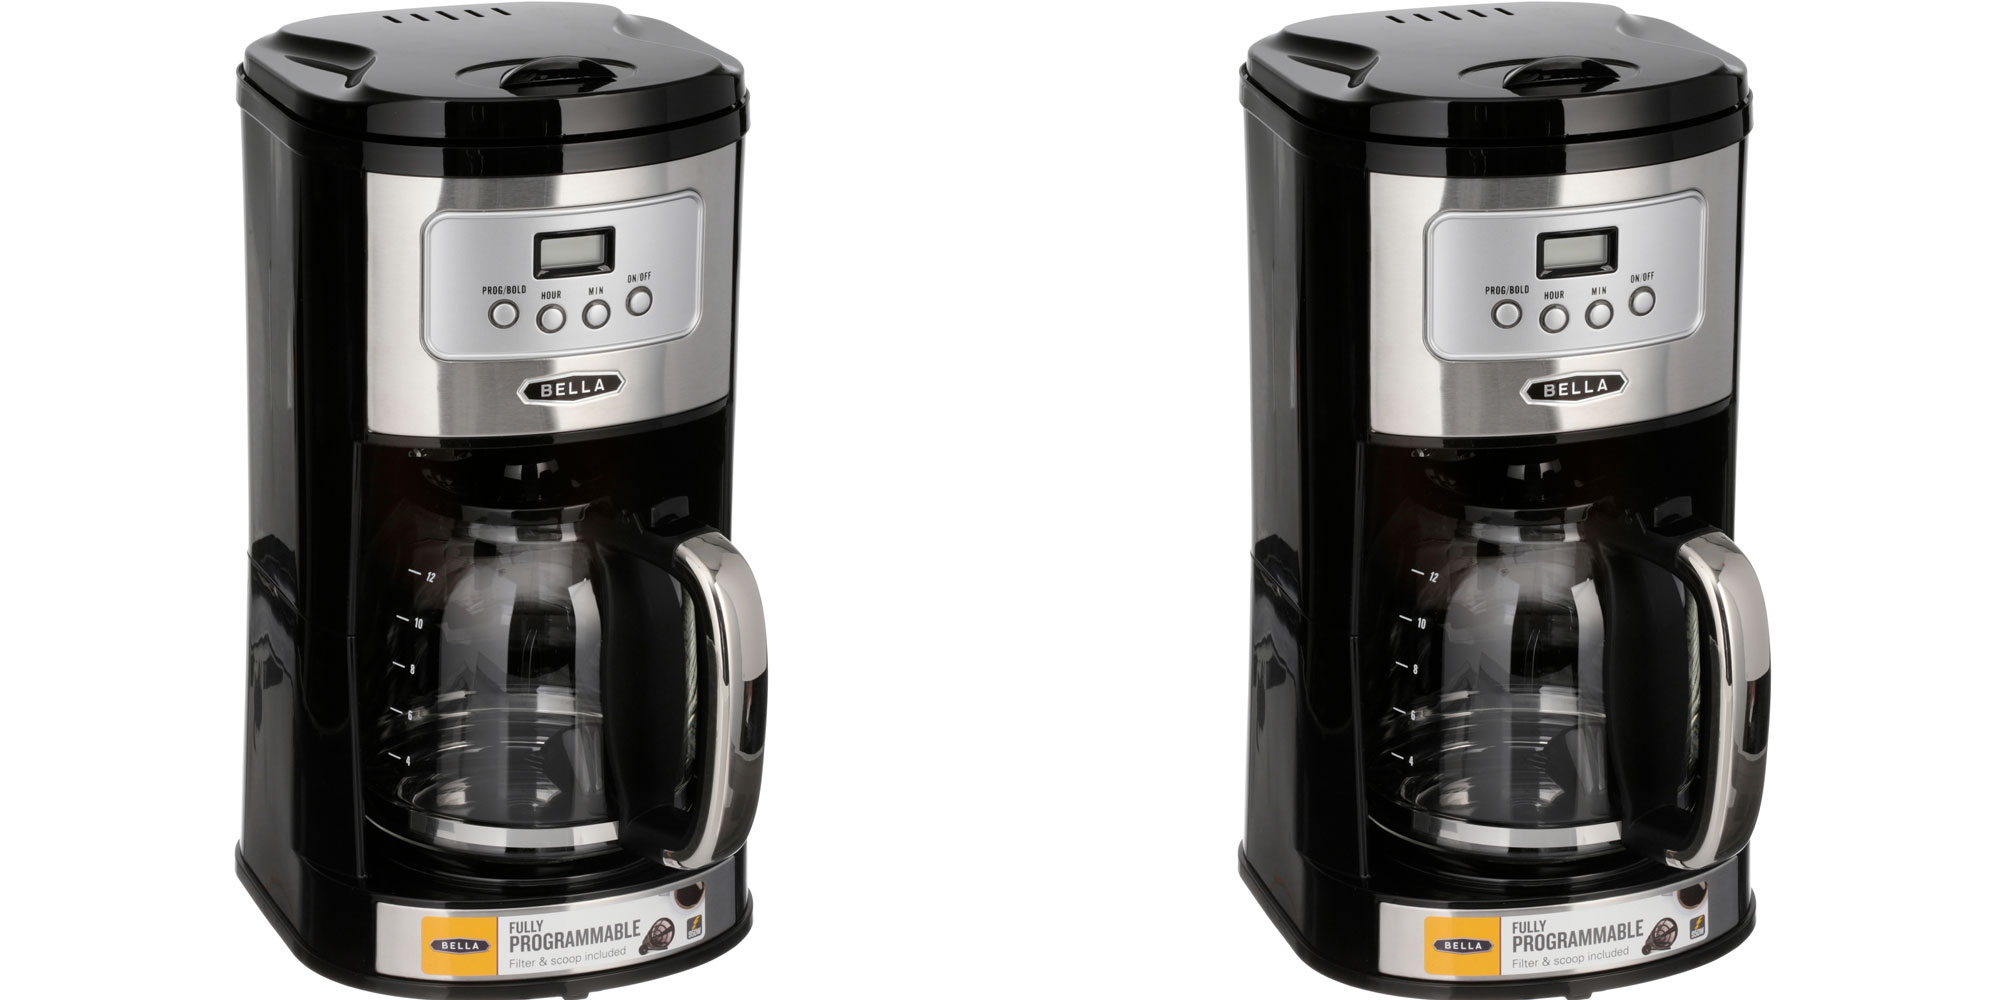 Wake up to coffee w/ this 12-cup programmable brewer for just $13.50